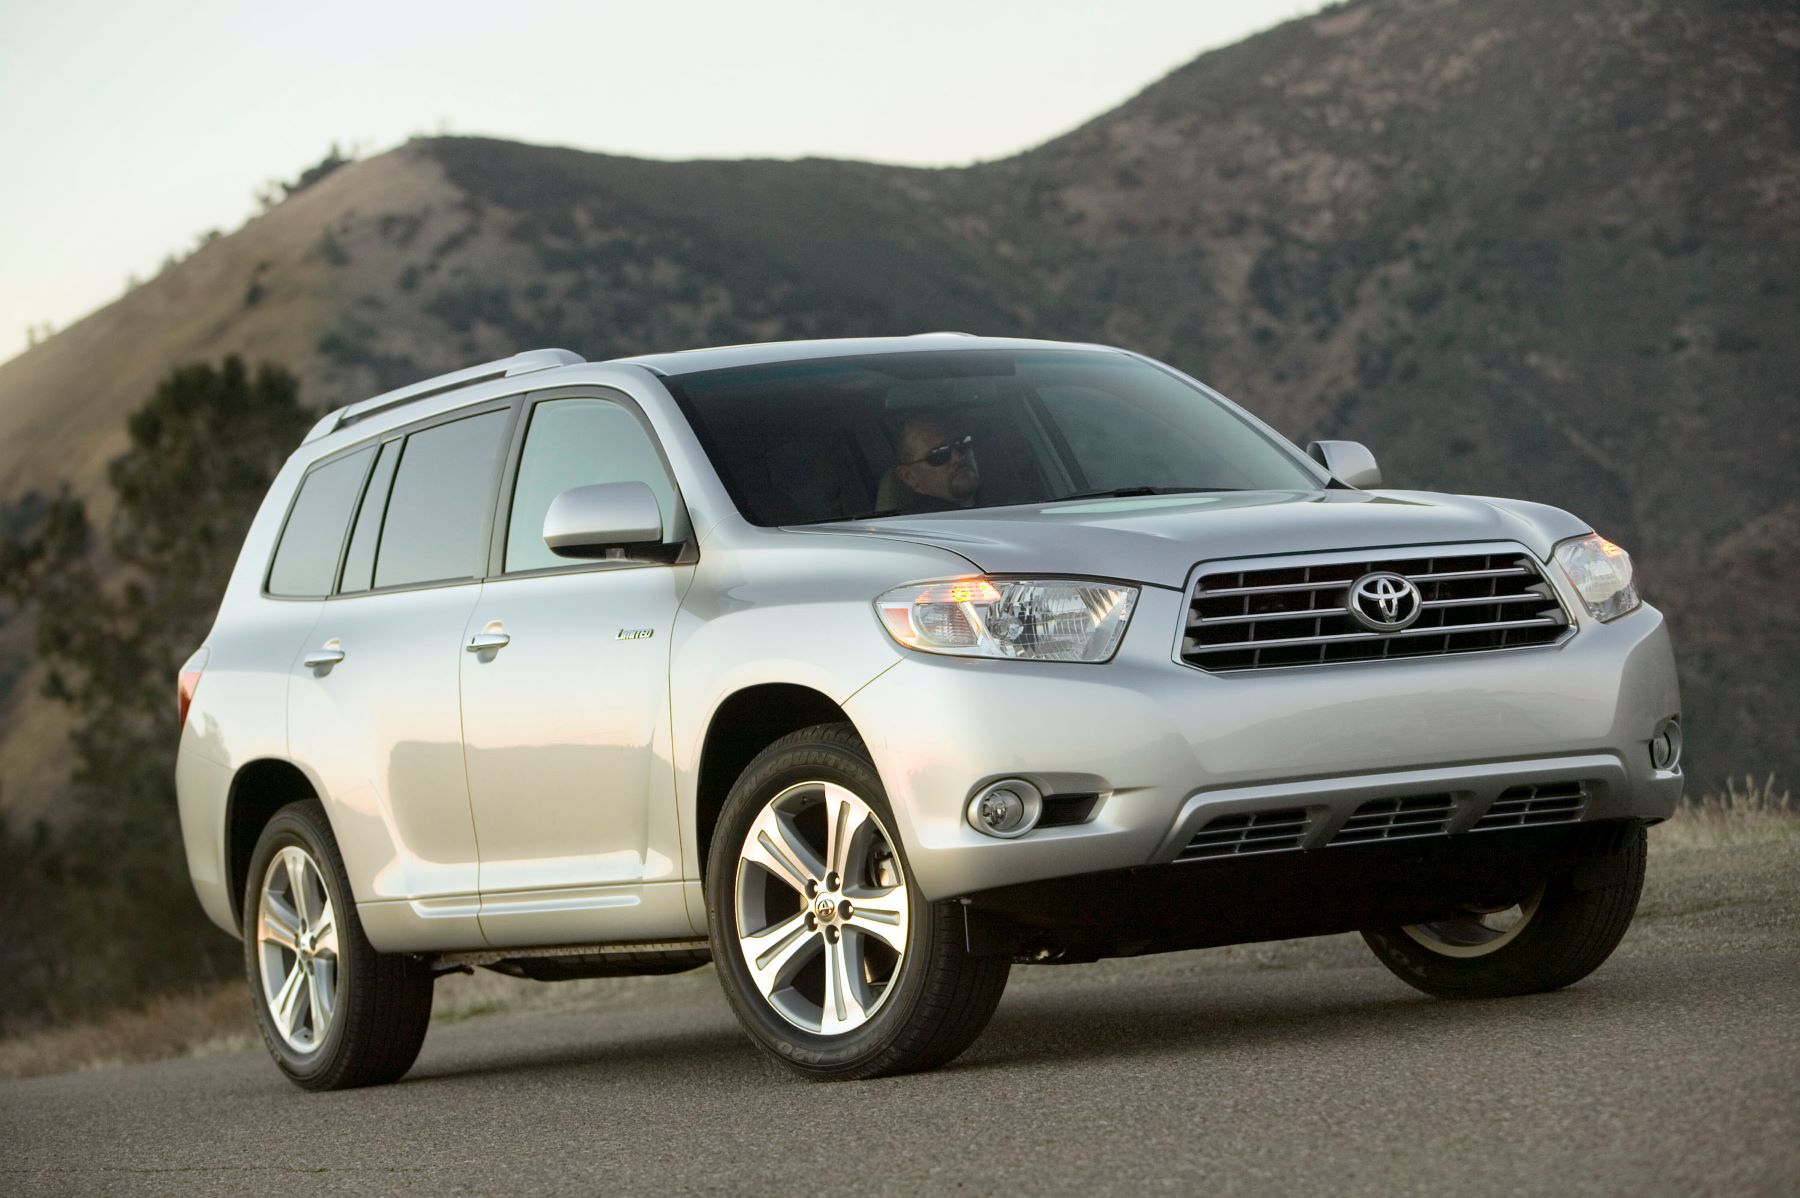 The 2008 Toyota Highlander Is the Best Used Midsize SUV Under $10,000,  According to KBB